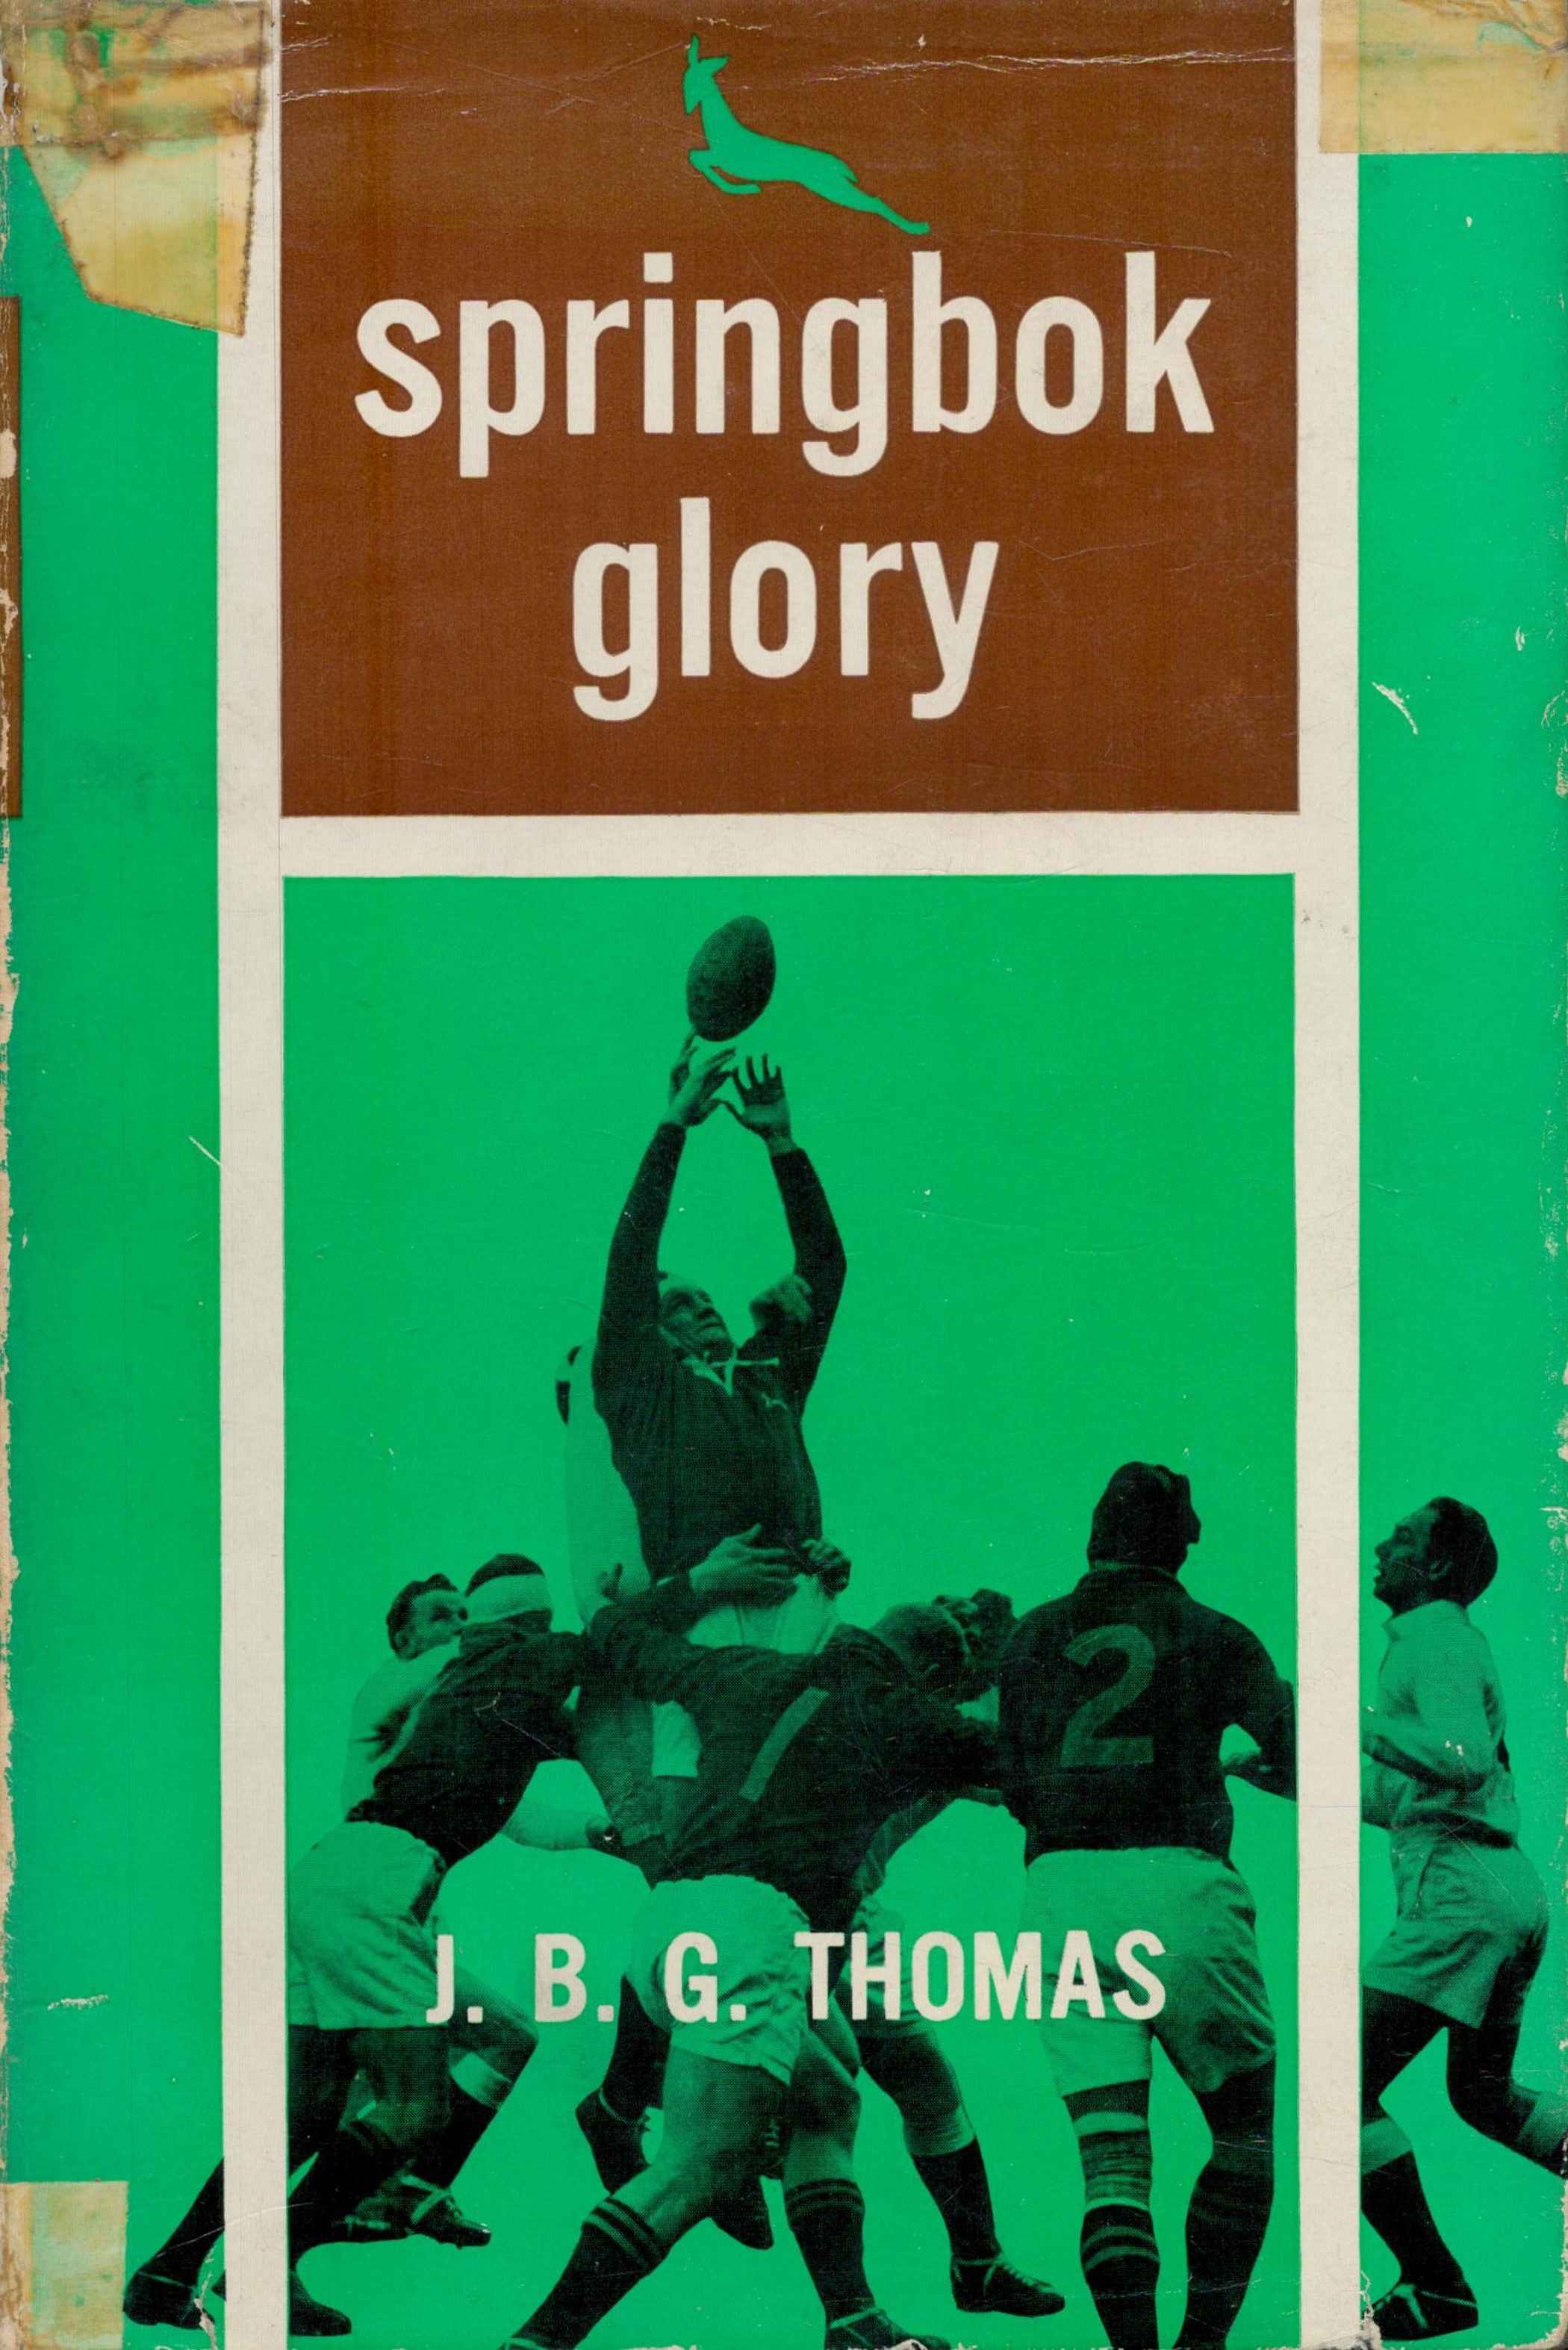 Springbok glory by J B G Thomas hardback book. Some damage to dustjacket. UNSIGNED. Good condition